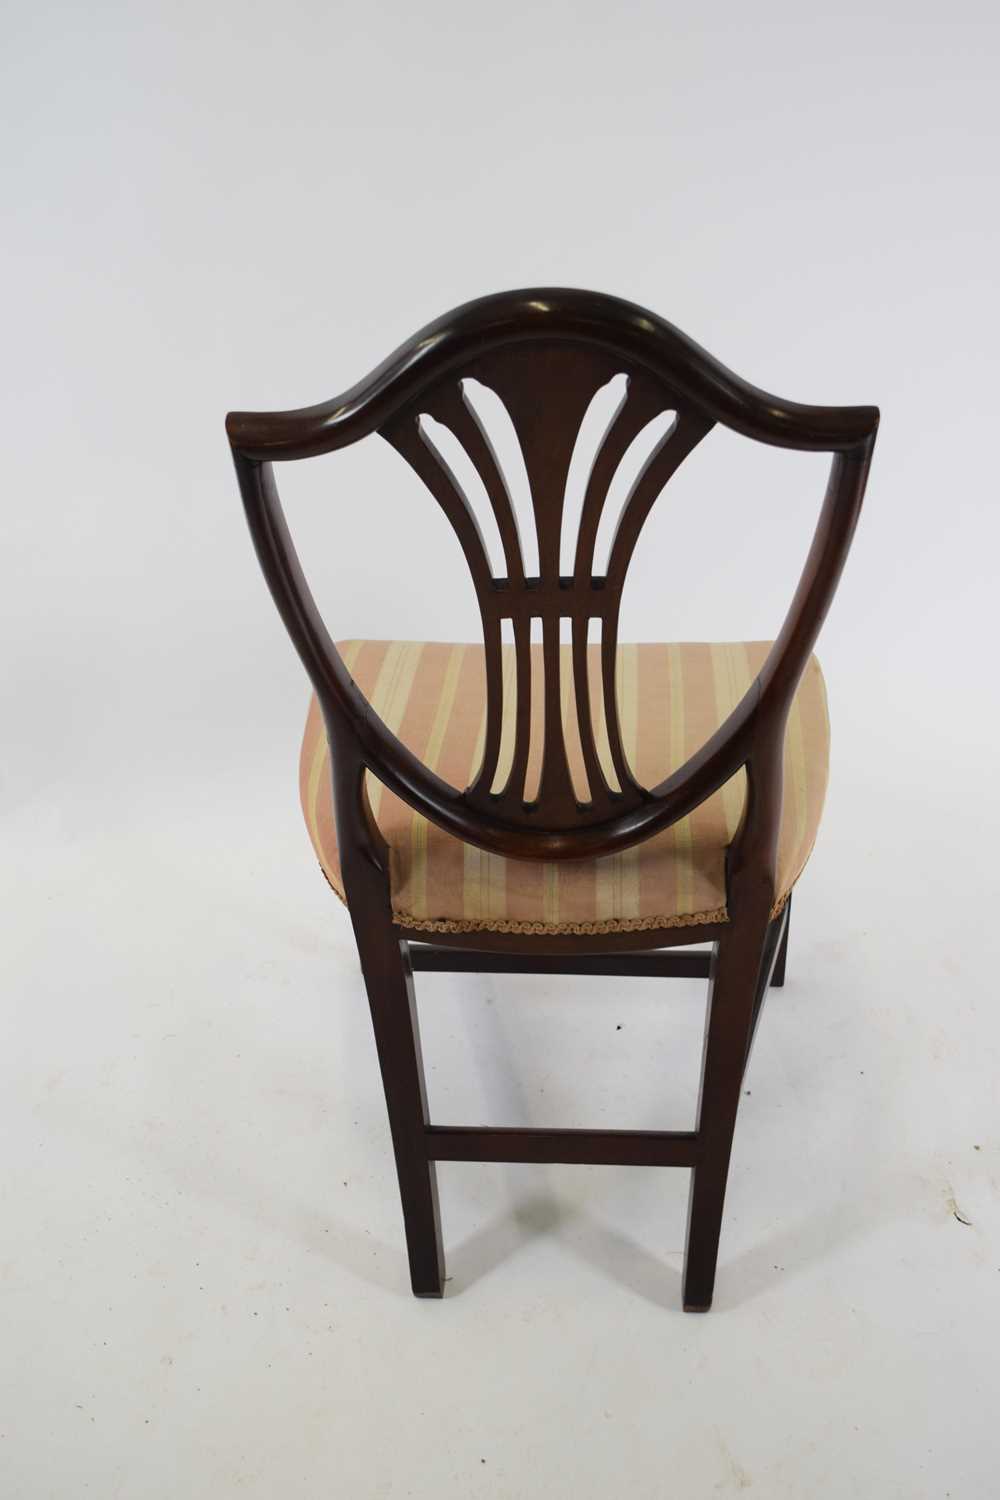 Mahogany framed shield back dining chair decorated with wheatsheaf detail and upholstered in striped - Image 3 of 4